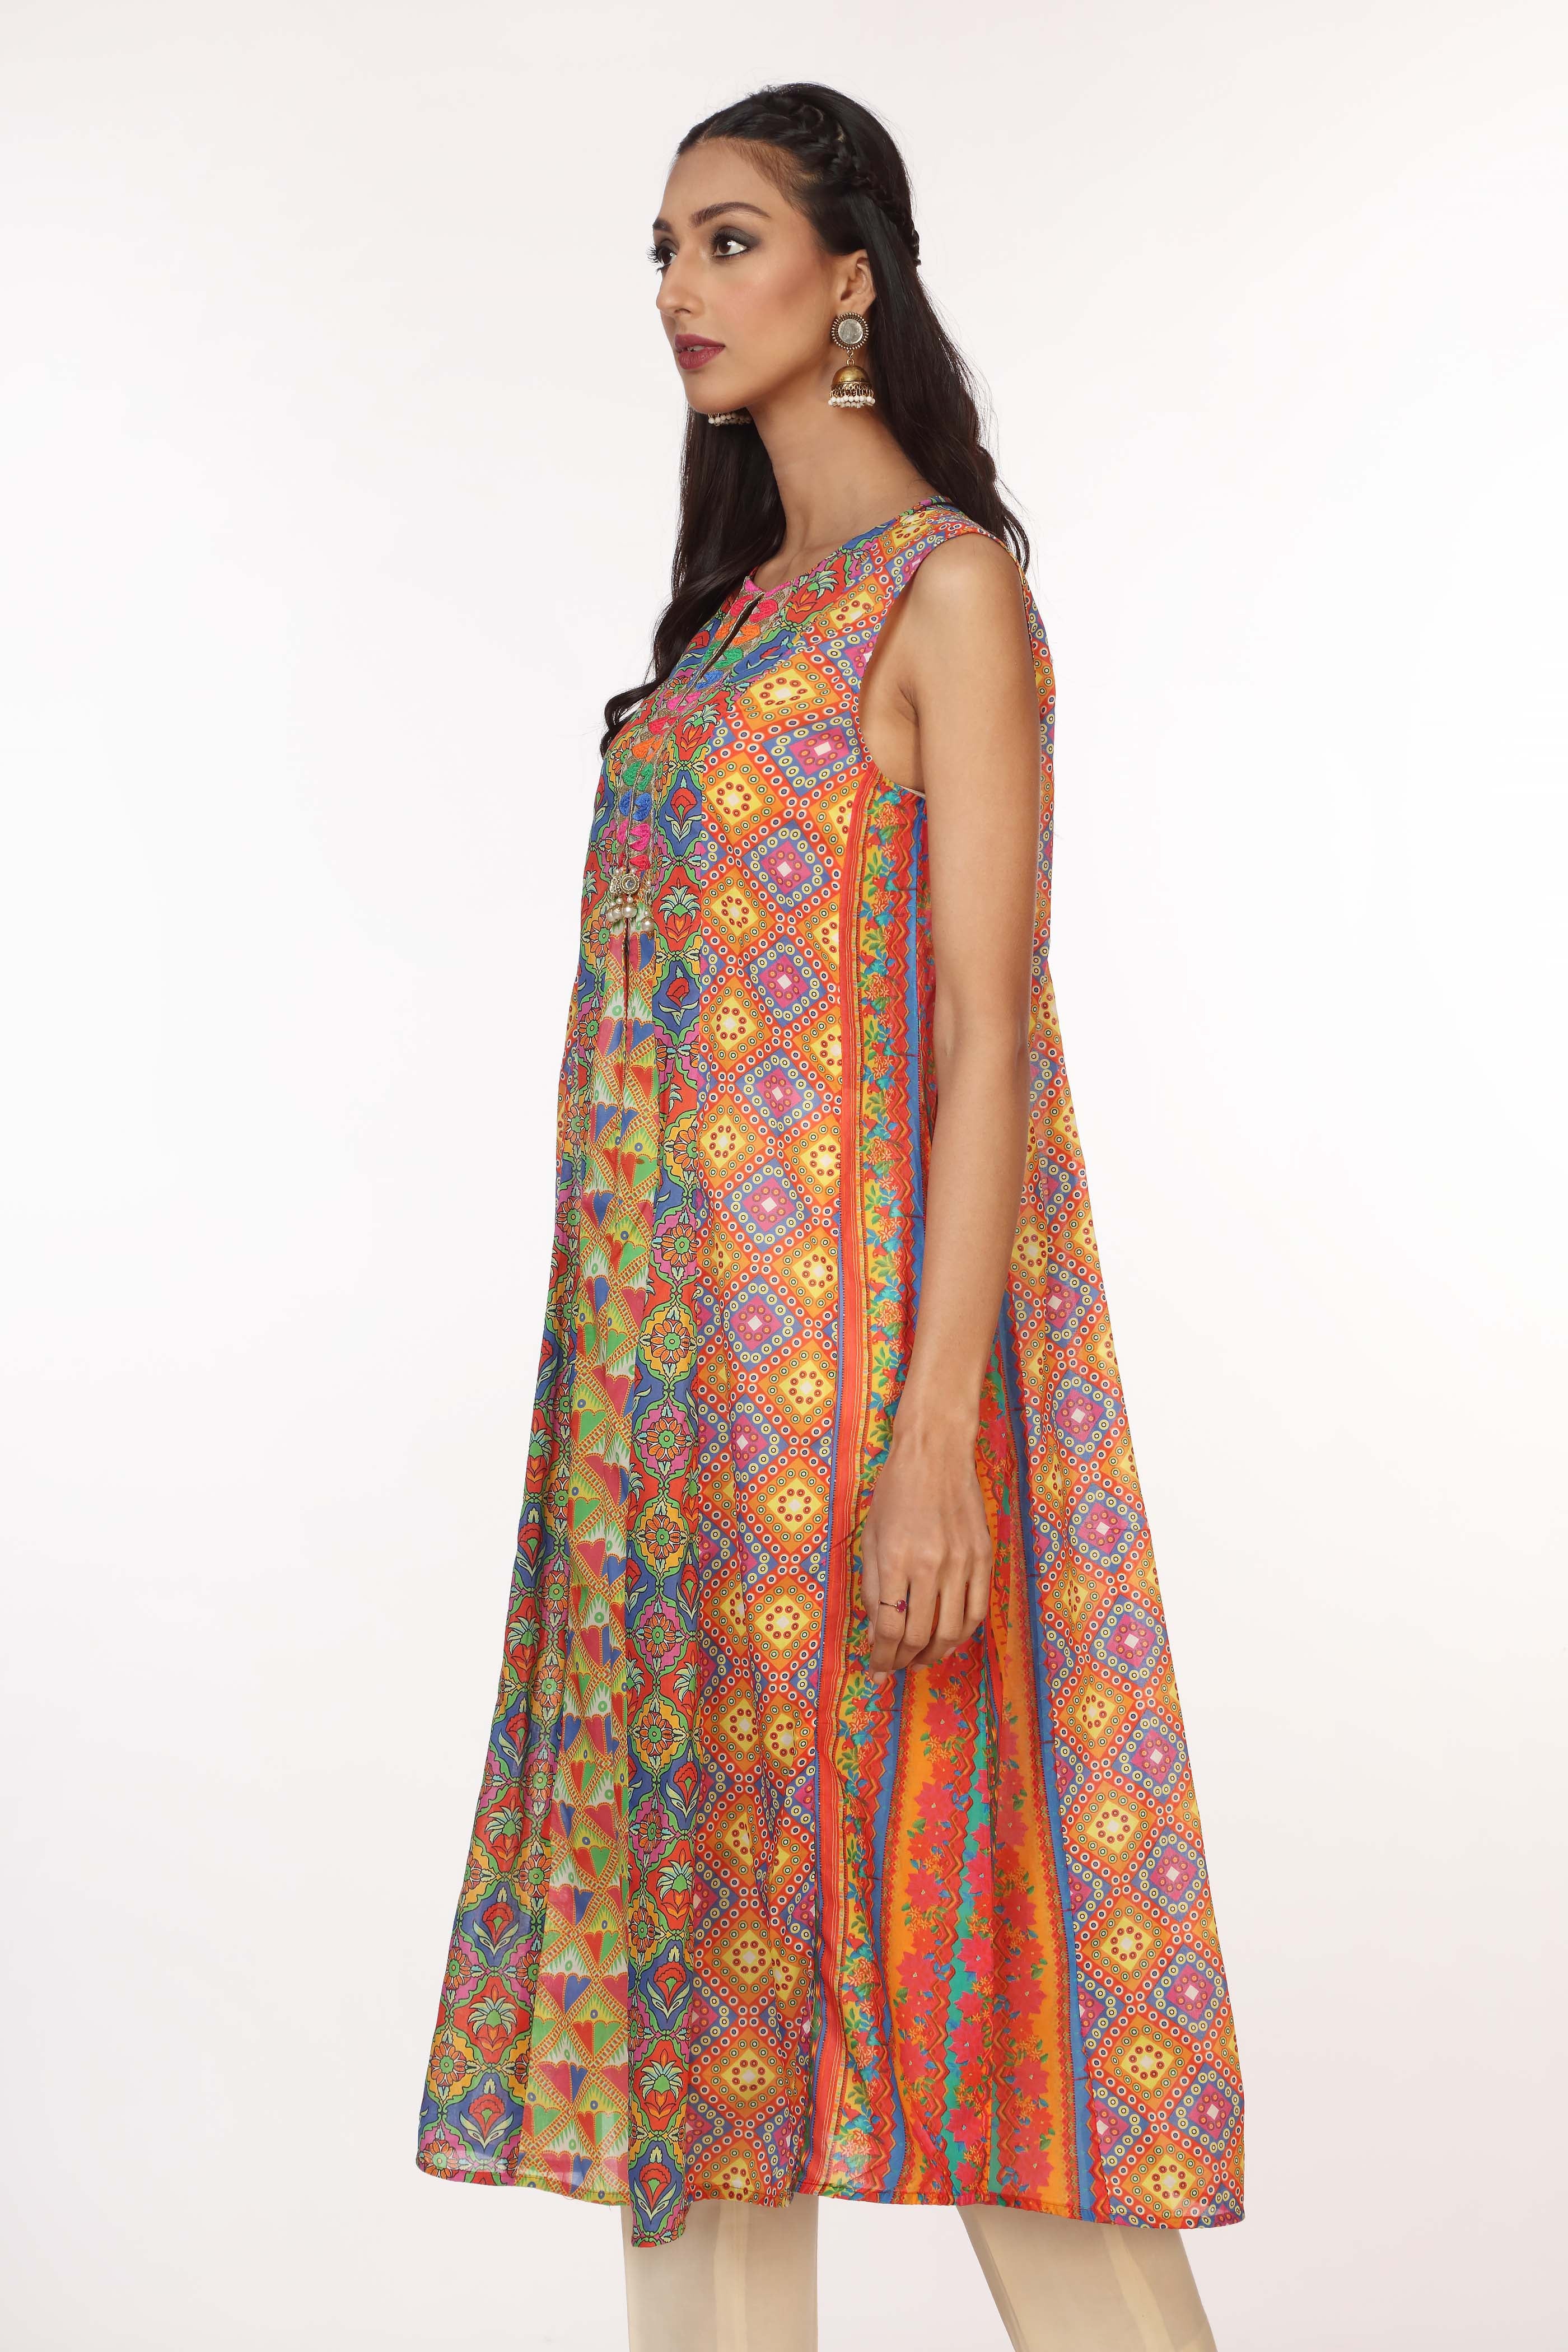 Moroccan Jaal in Multi coloured Printed Lawn fabric 2